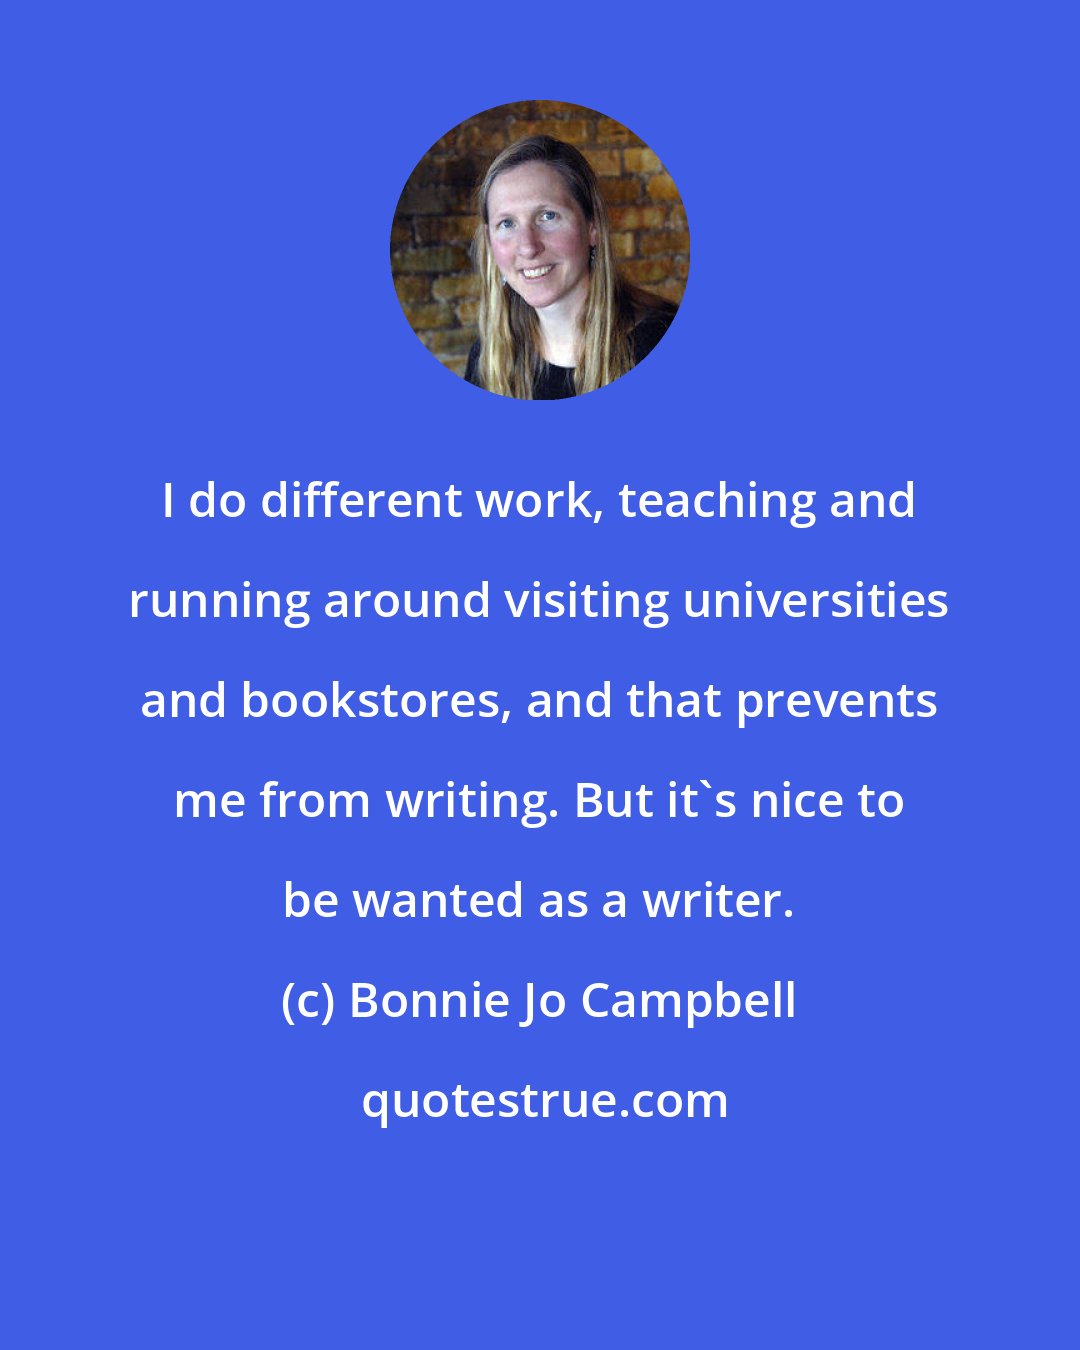 Bonnie Jo Campbell: I do different work, teaching and running around visiting universities and bookstores, and that prevents me from writing. But it's nice to be wanted as a writer.